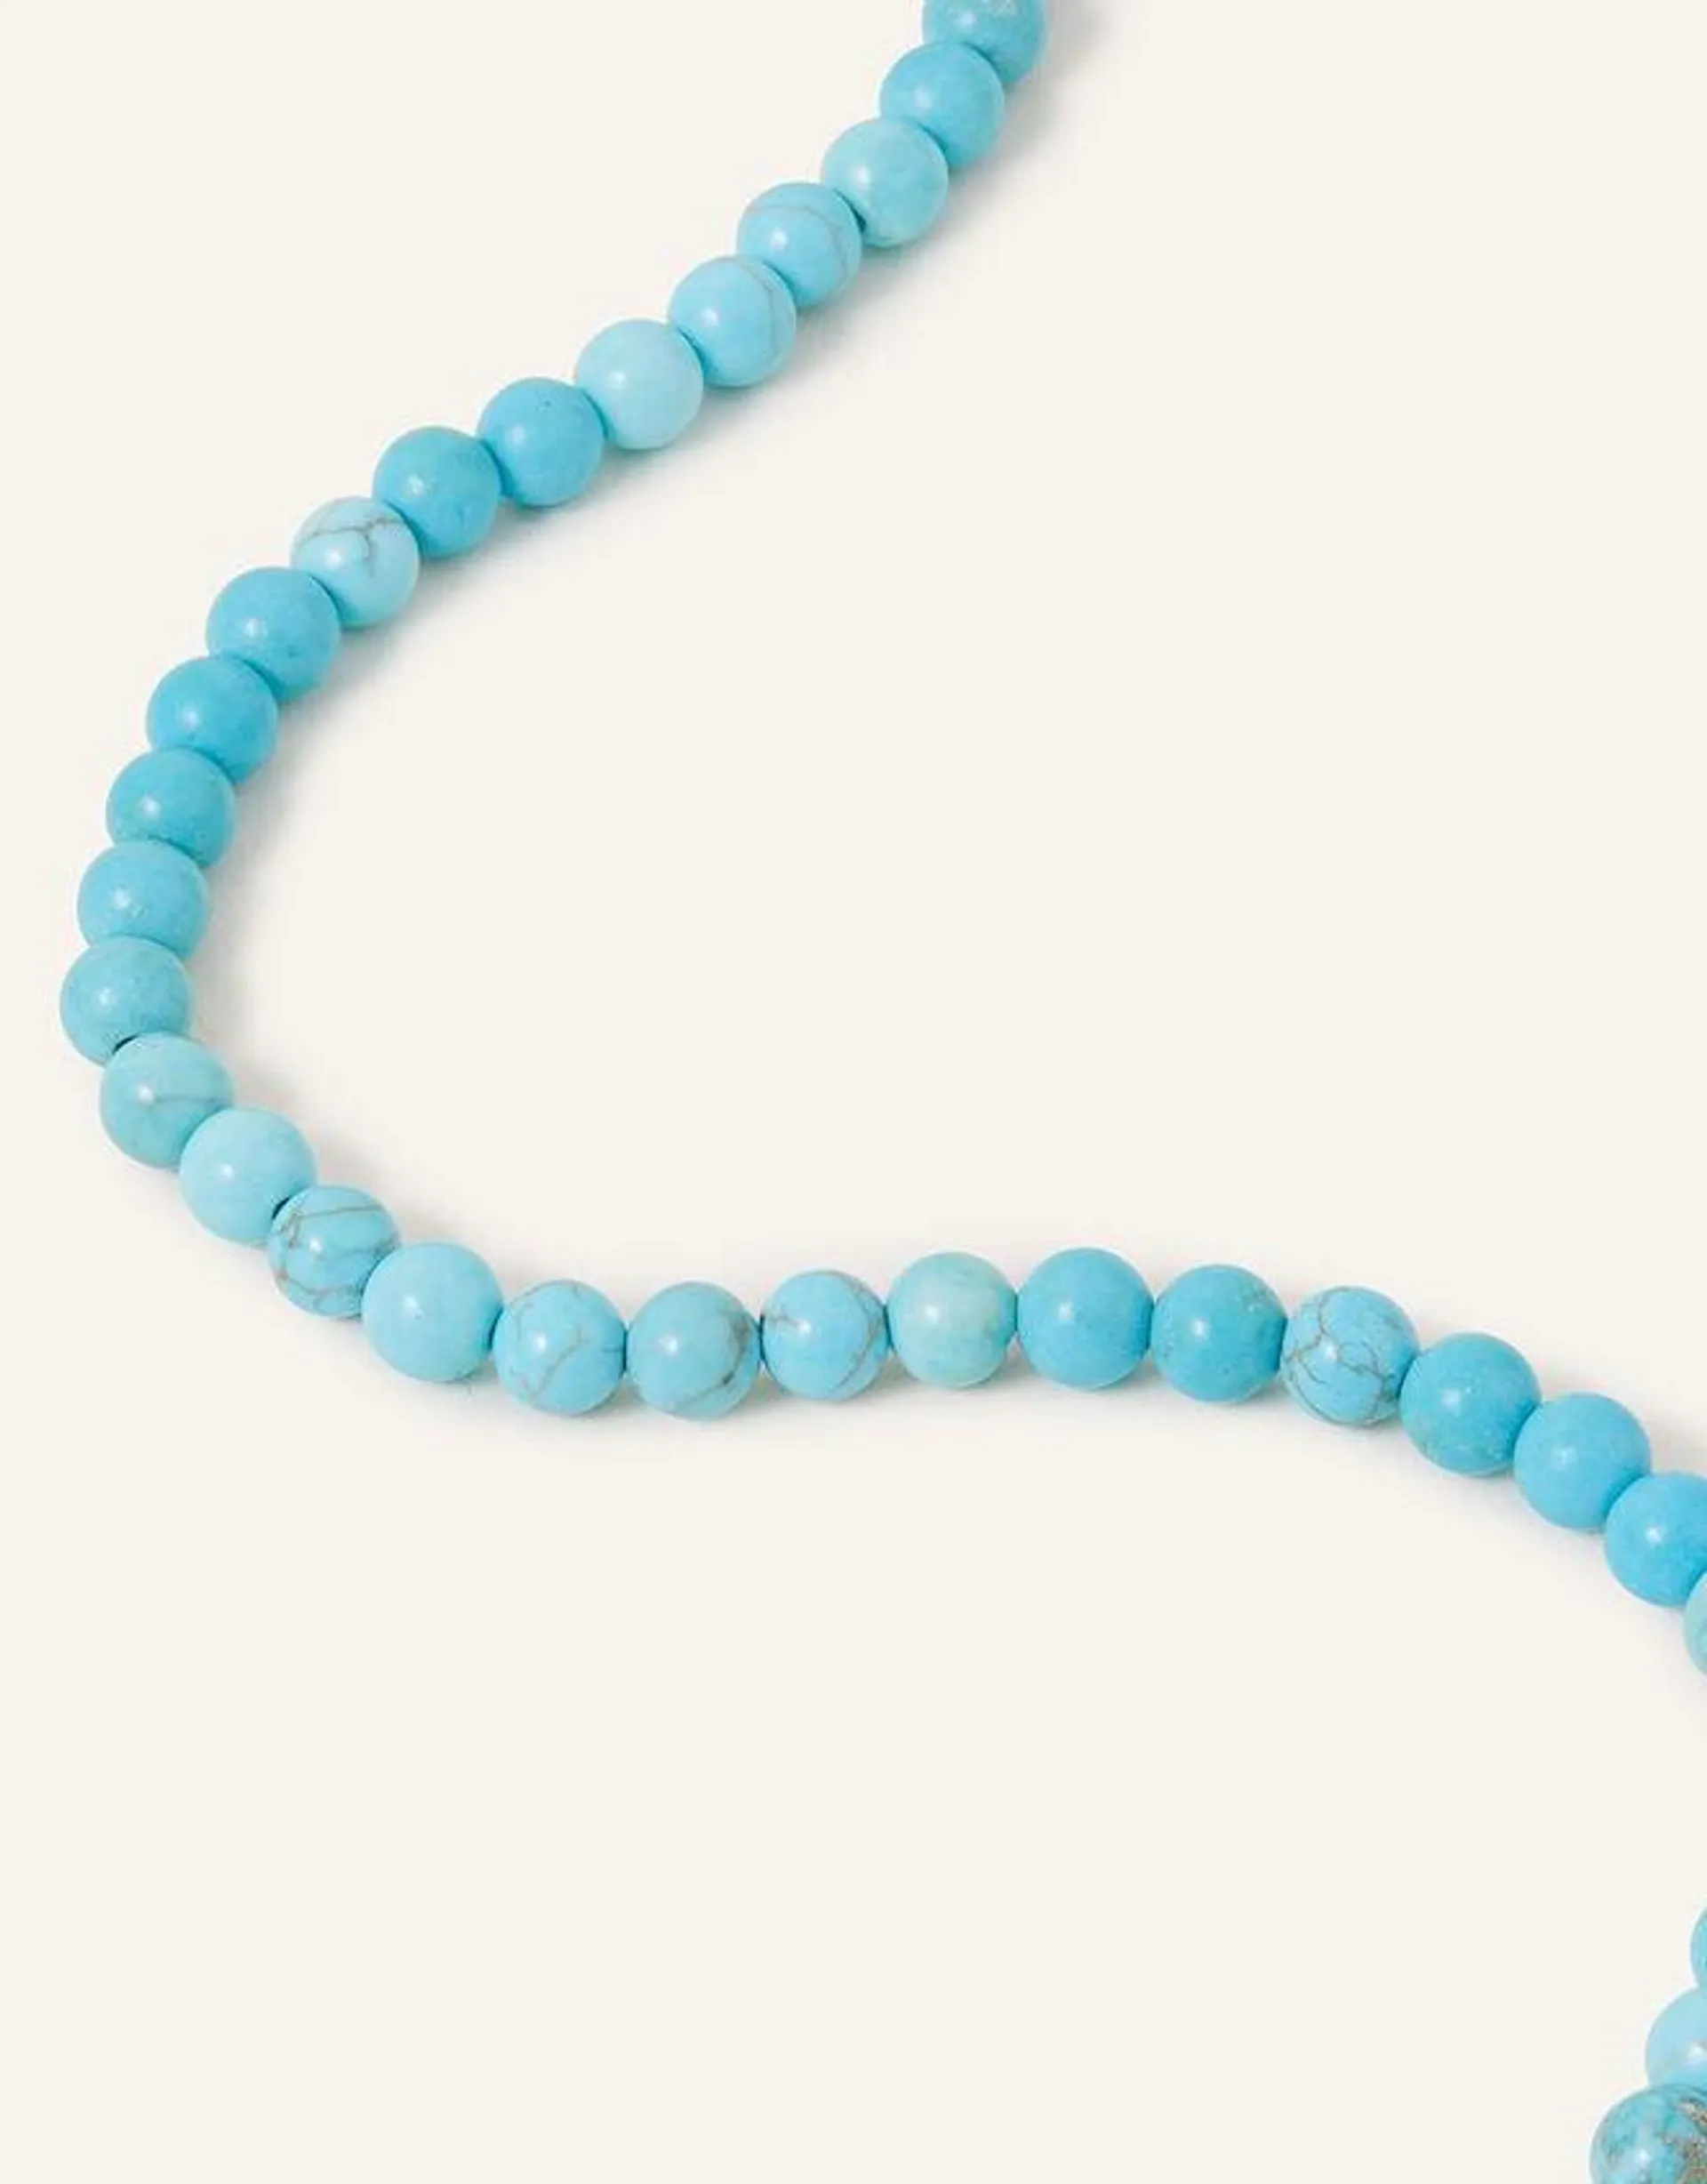 14ct Gold-Plated Healing Stone Turquoise Beaded Necklace